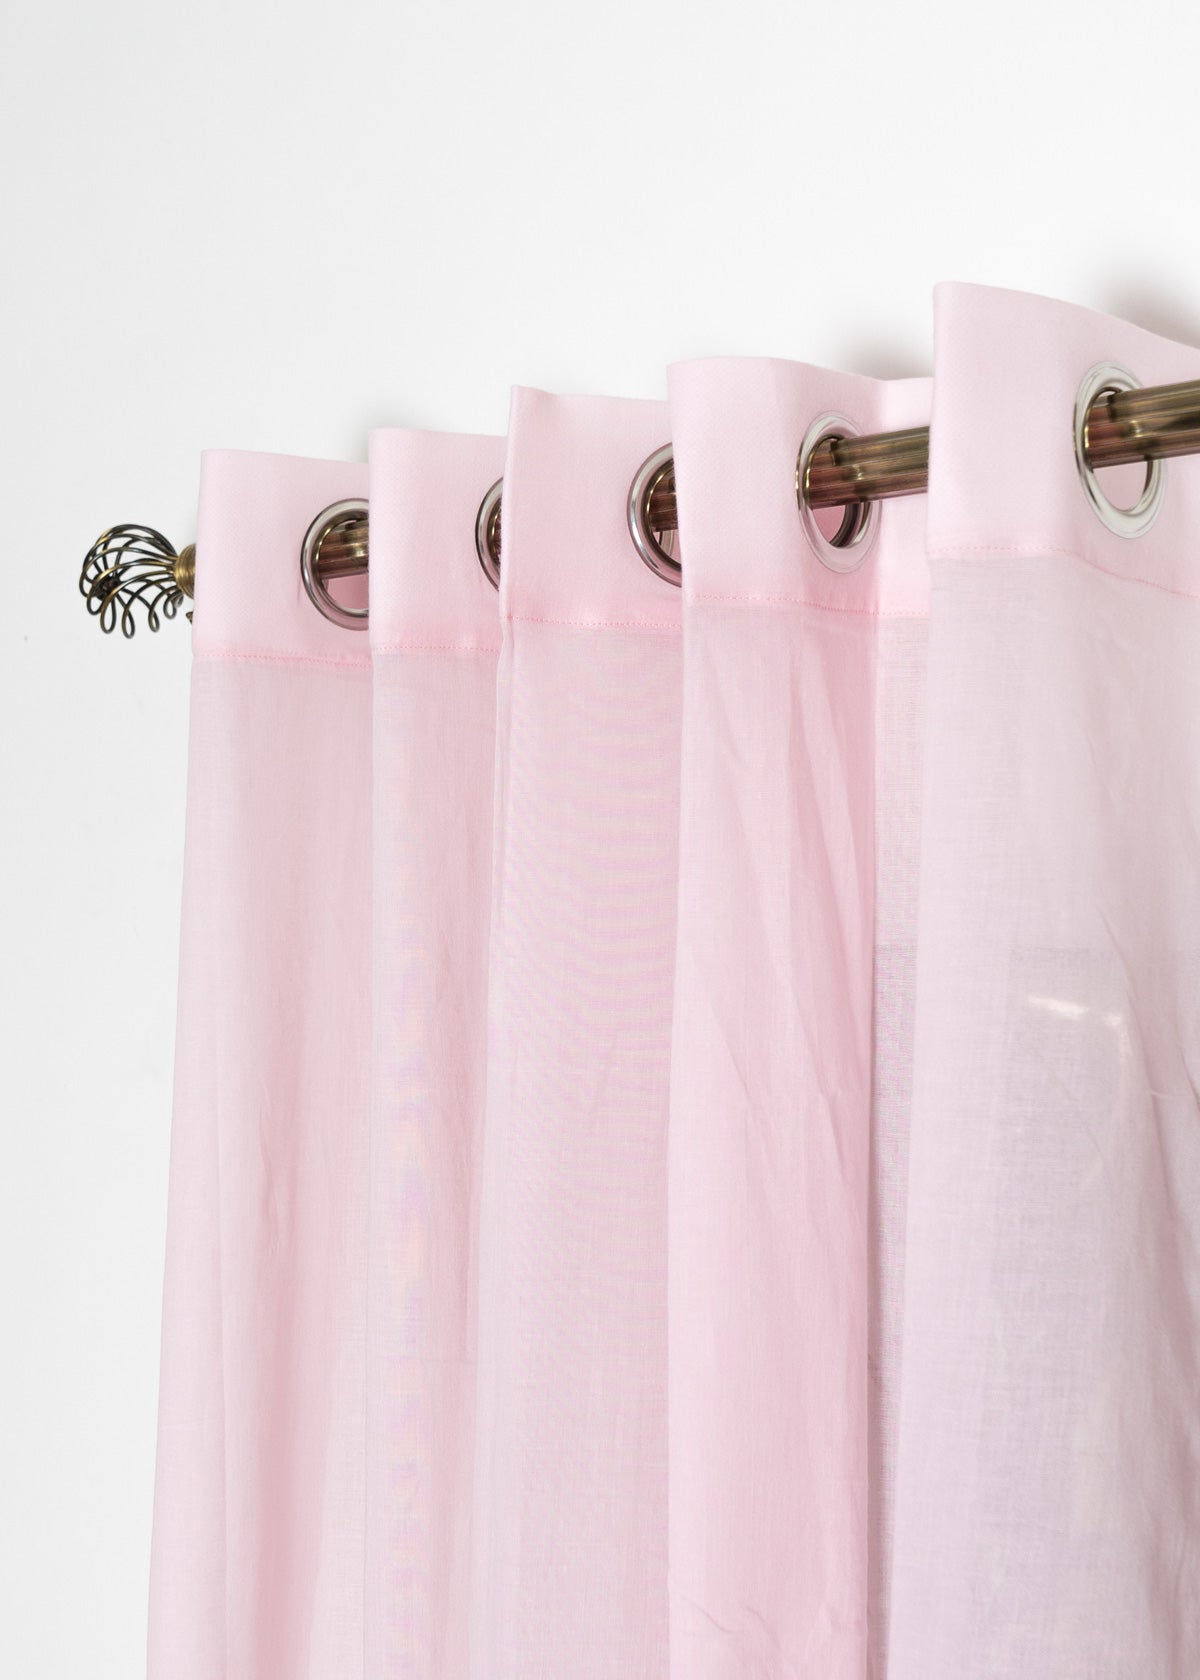 Solid Powder pink sheer 100% Customizable Cotton plain curtain for Living room & bedroom - Light filtering